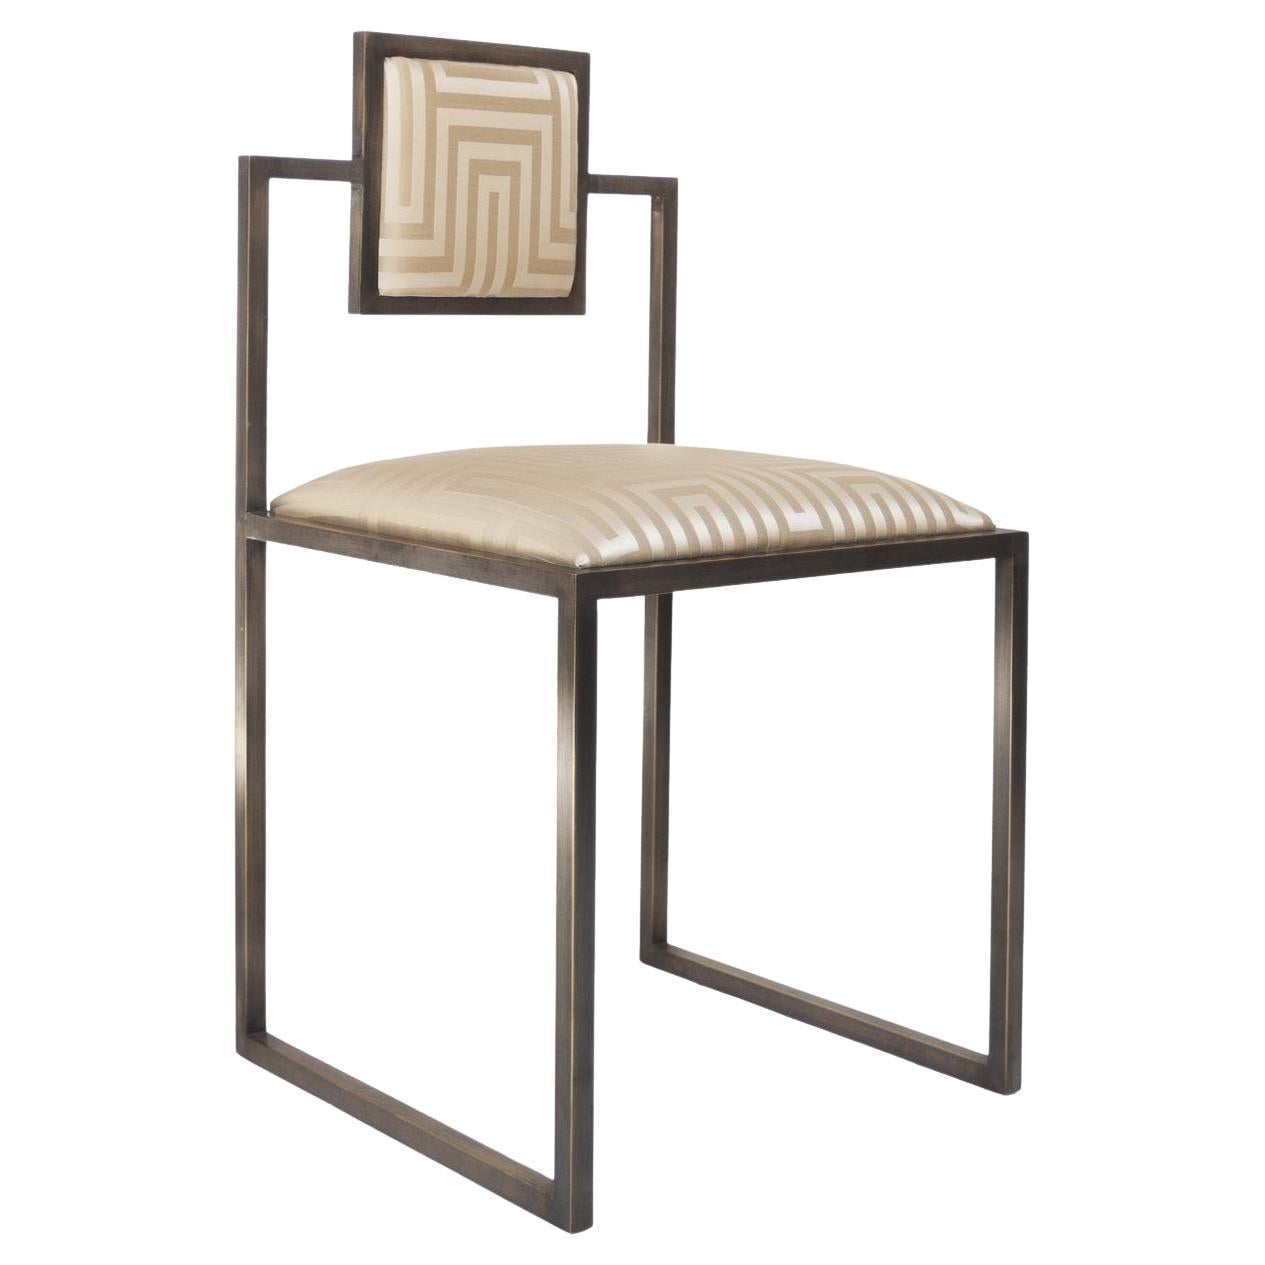 Champagne Square Chair